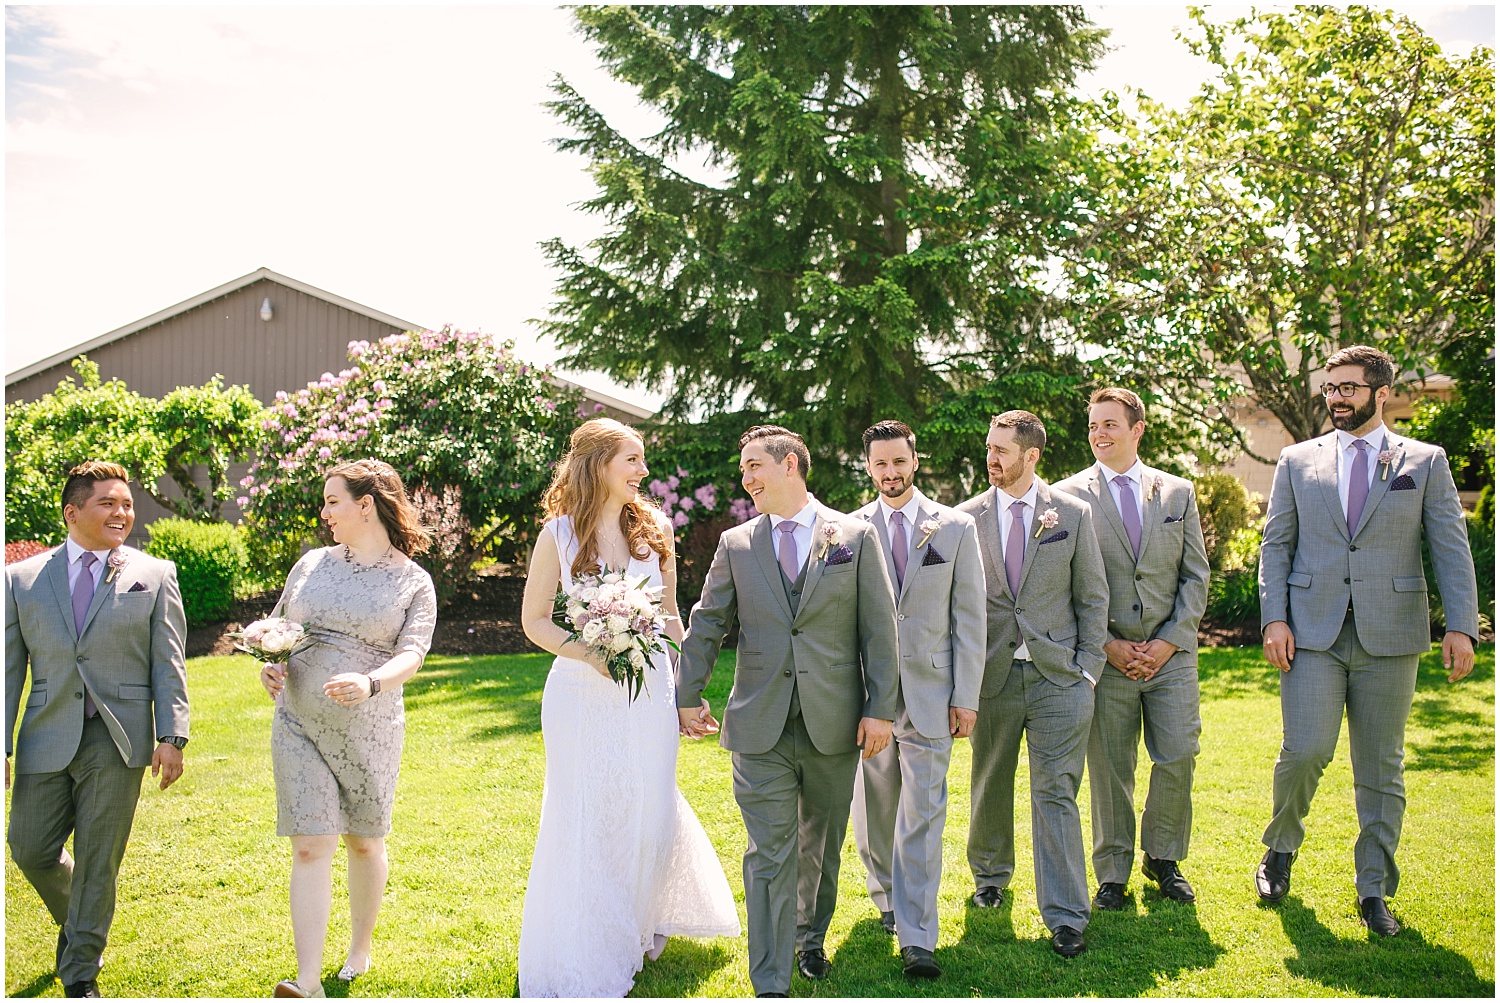 Wedding party all in gray with purple accents at Lord Hill Farms wedding in Snohomish Washington